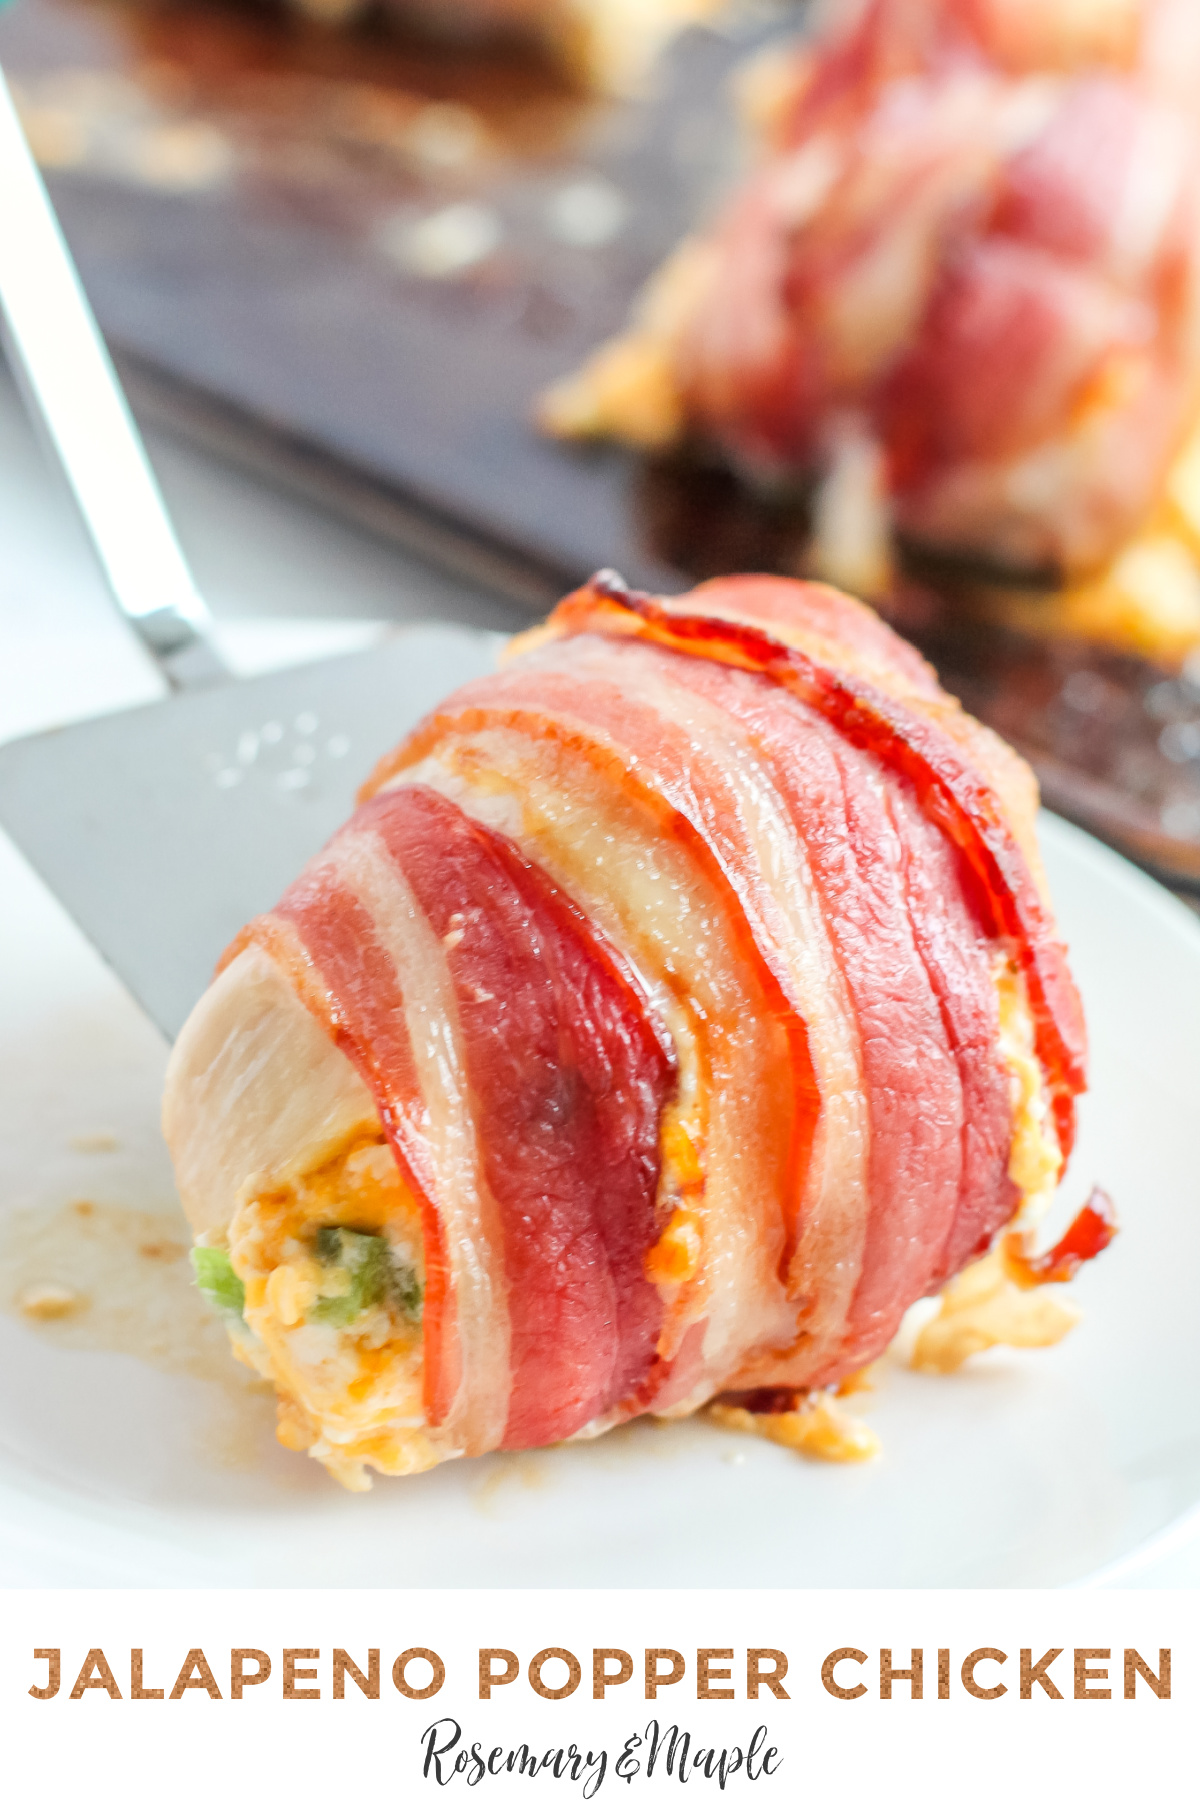 This delicious and easy-to-follow bacon wrapped jalapeño popper stuffed chicken recipe is perfect for a quick and tasty weeknight meal.